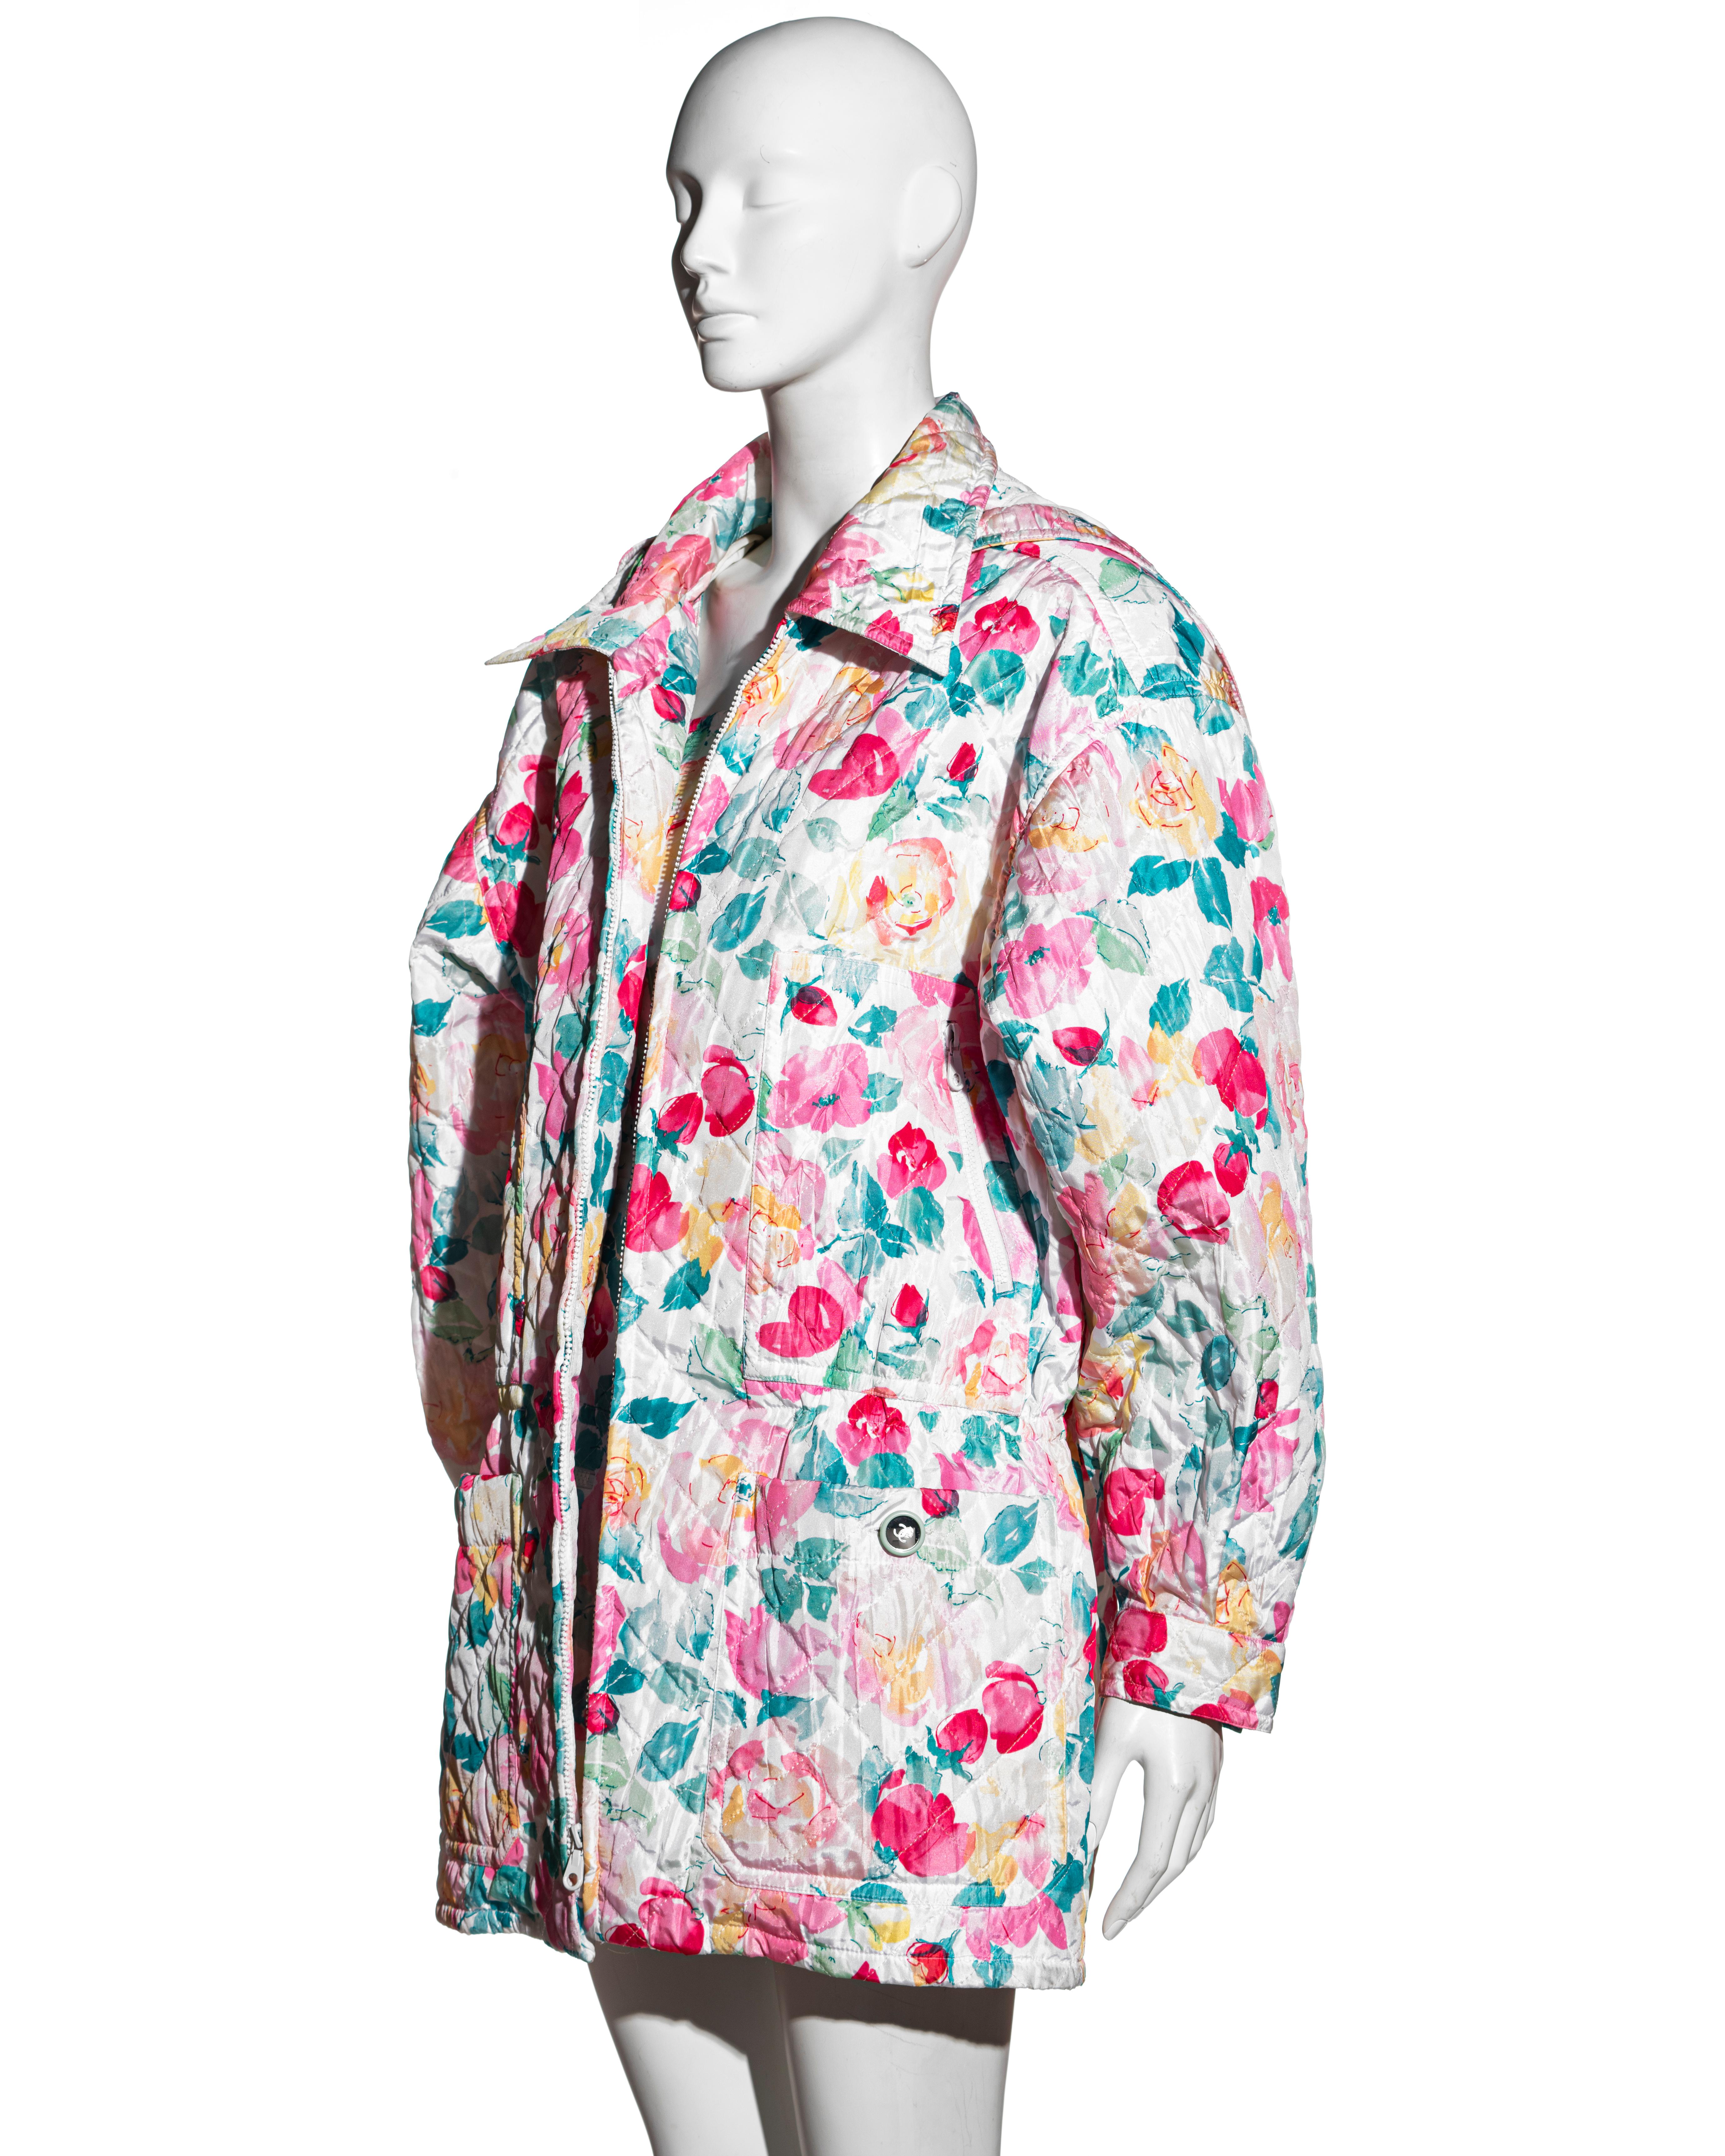 Chanel by Karl Lagerfeld pink rose print quilted playsuit and coat set, c 1994 In Good Condition For Sale In London, GB